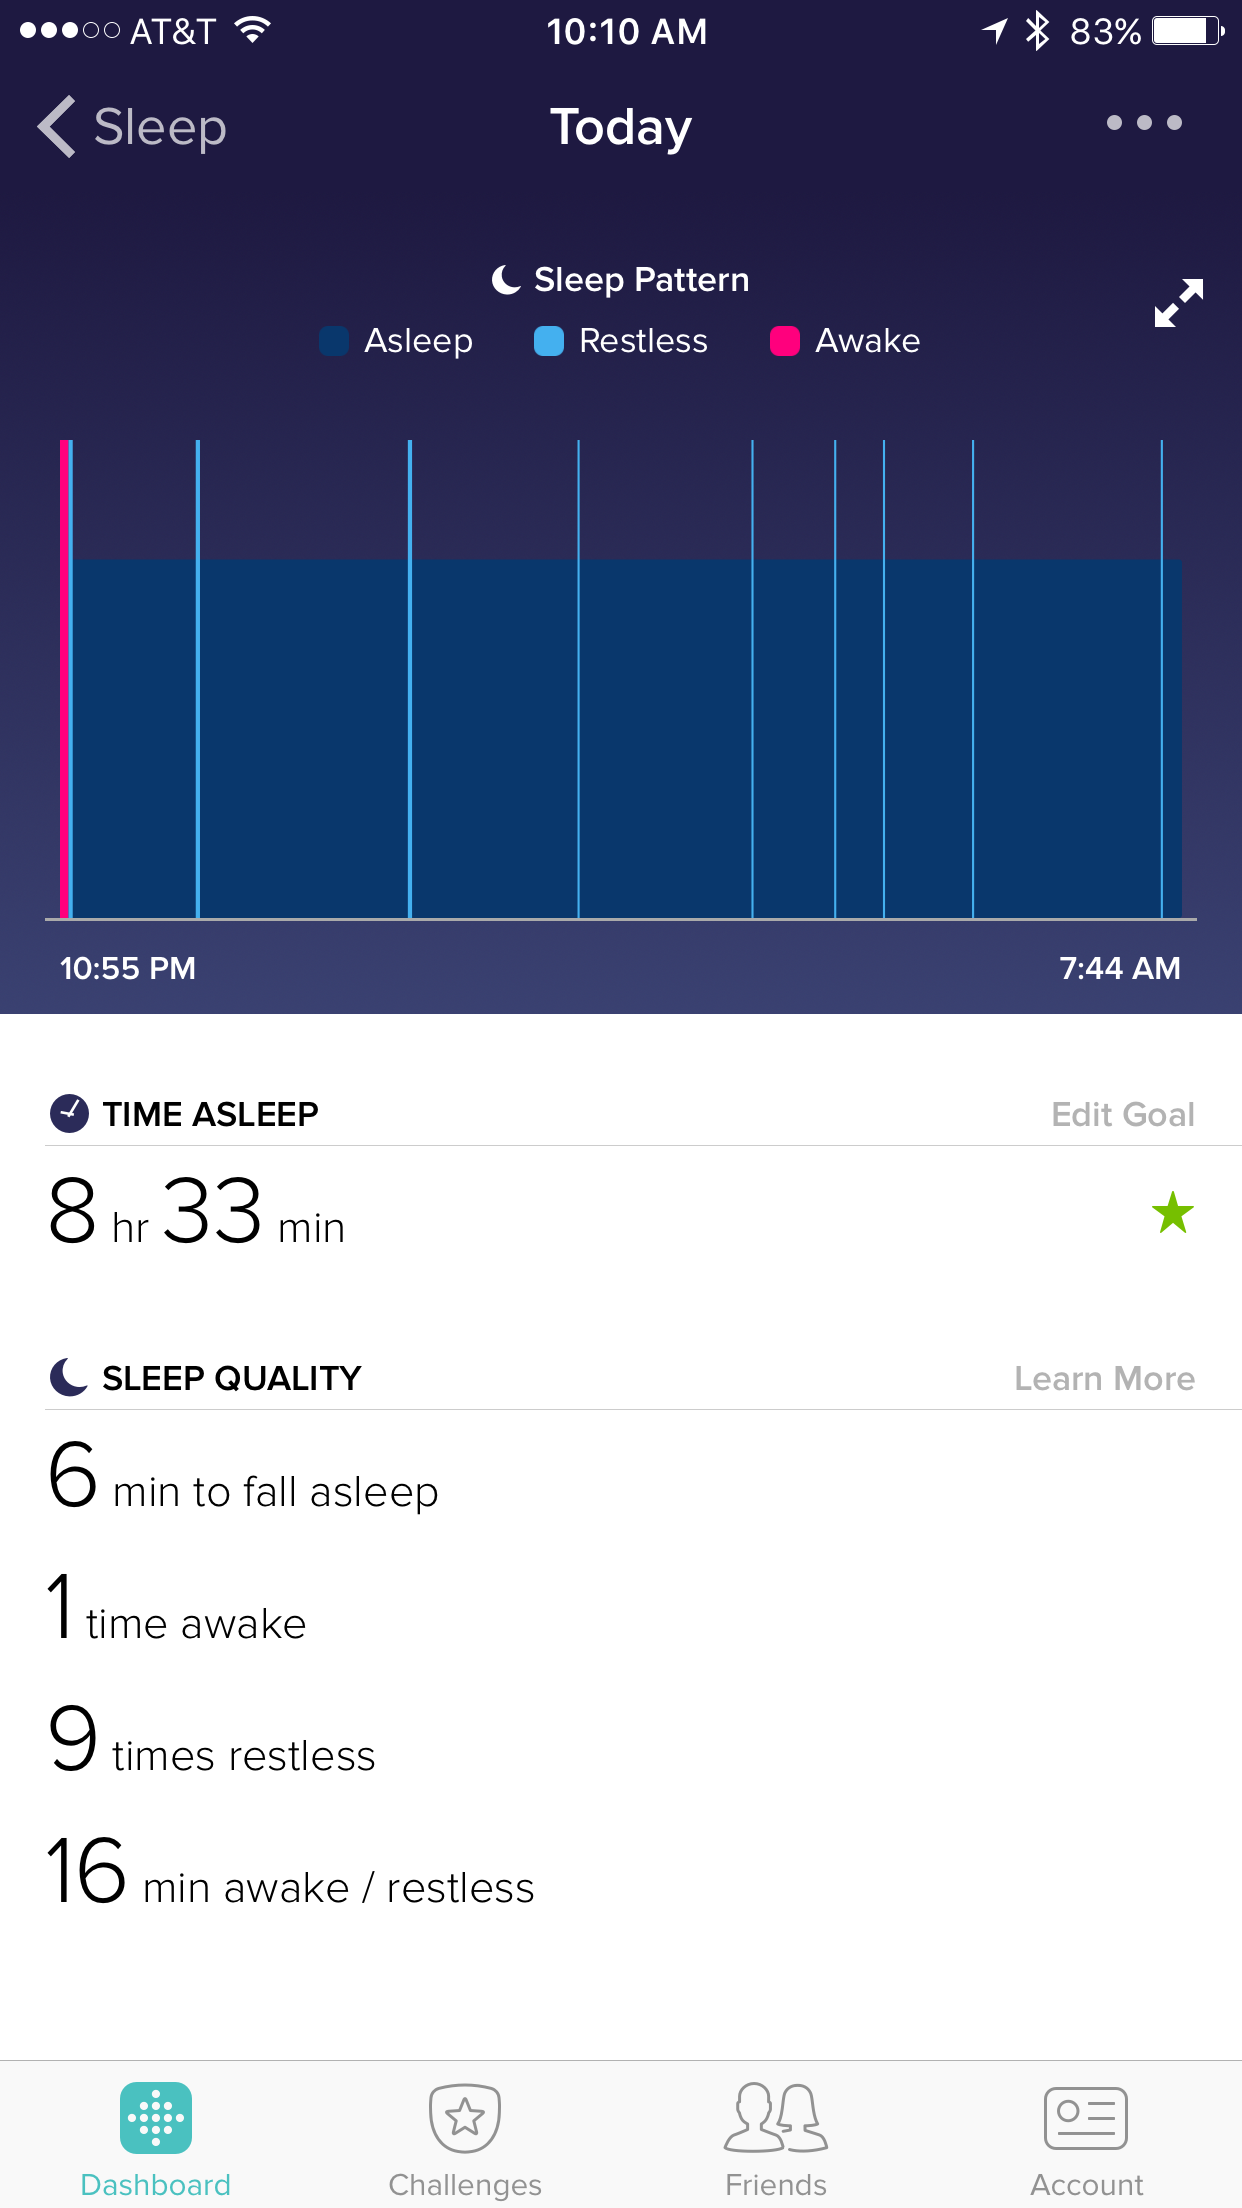 Sleep Monitor screen from Fitbit App.